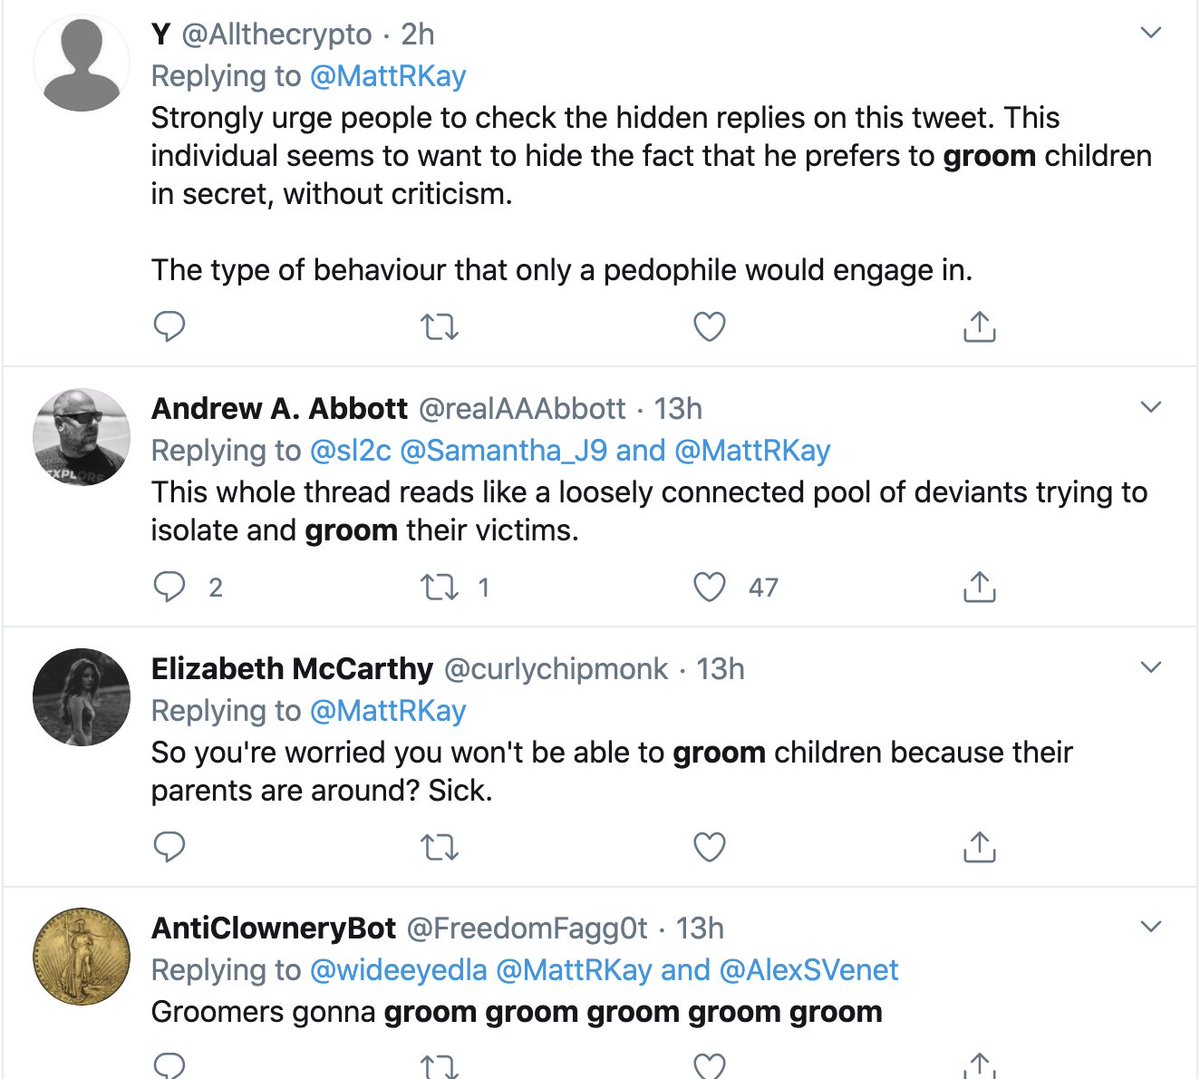 An activist educator concerned that woke education won't work with outside observers. Swarm of replies say he's a pedophile grooming children instead of engaging with his argument.Calling everyone you disagree with a pedophile is a vile bad faith argument, and it's everywhere.